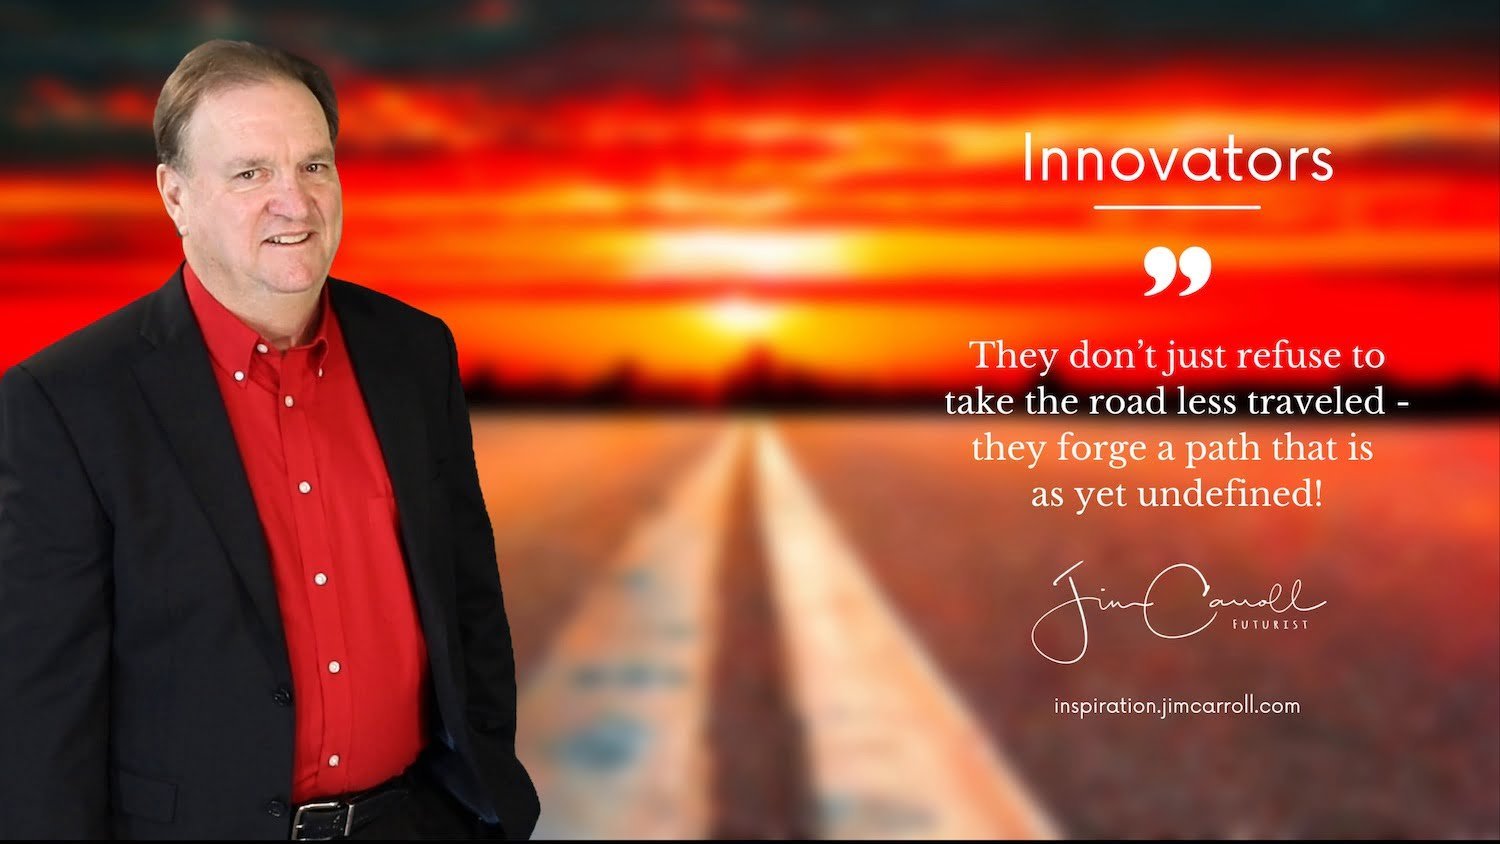 Daily Inspiration: "Innovators: They don’t just refuse to take the road less traveled - they forge a path that is as yet undefined!"